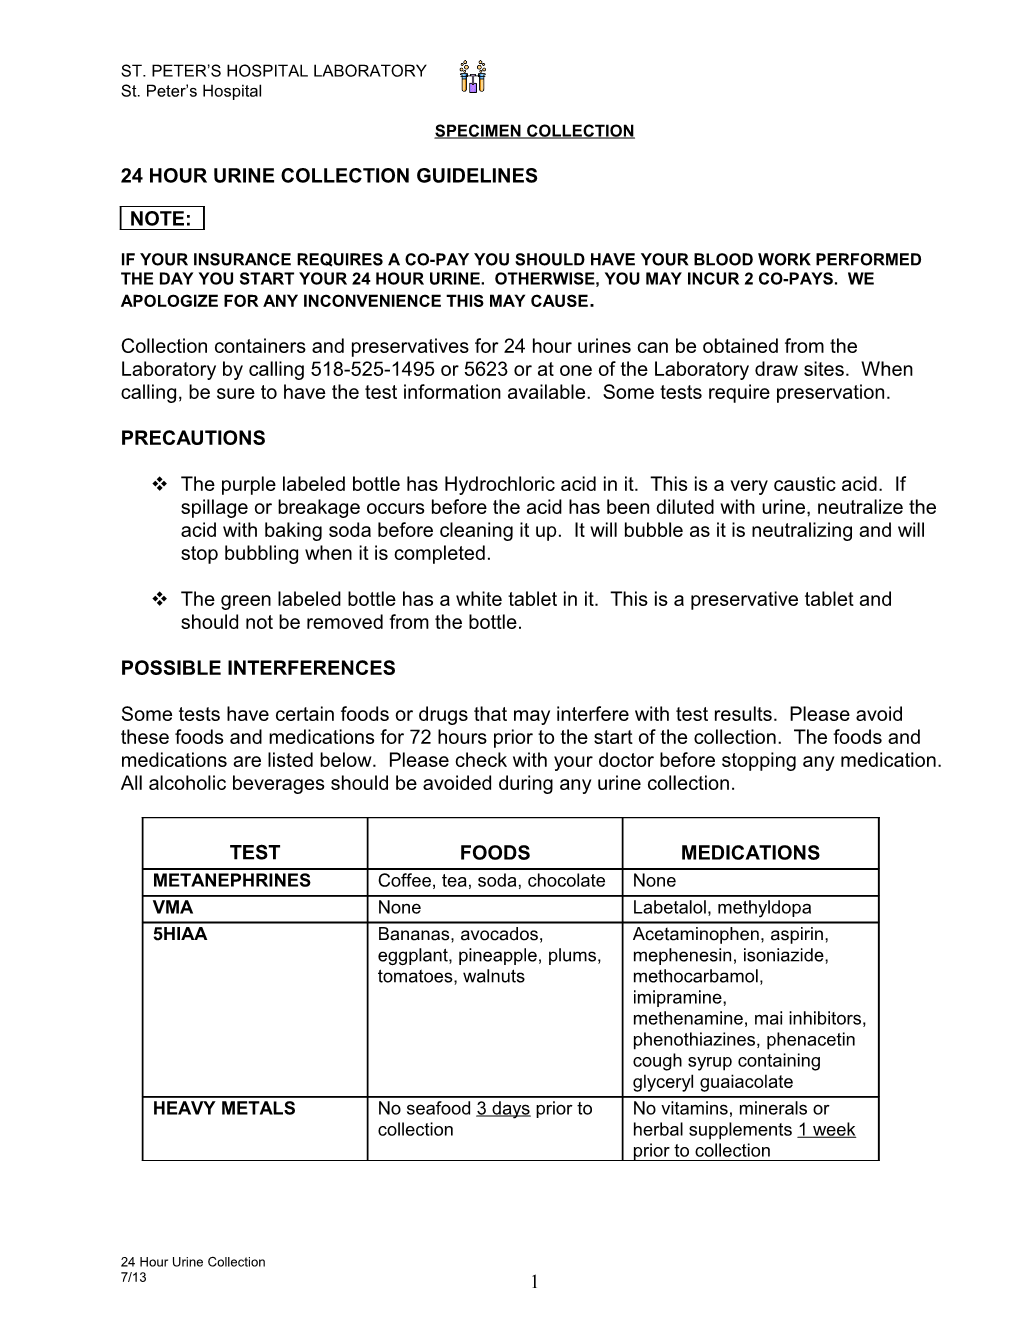 24 Hour Urine Collection Guidelines